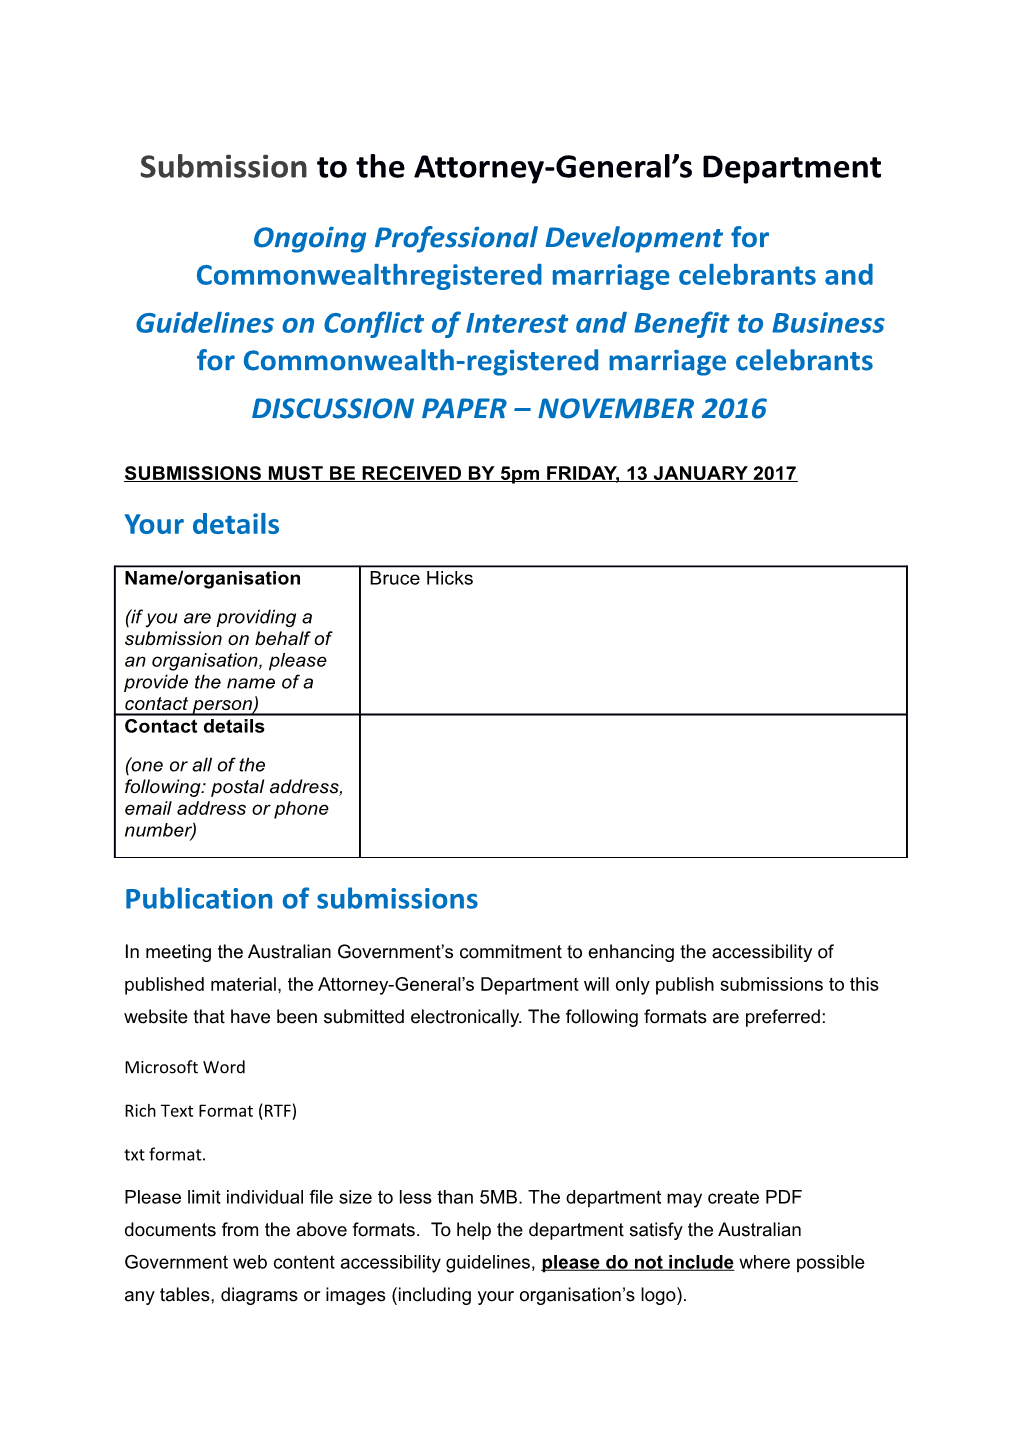 Submissions to OPD for Marriage Celebrants Consultation - Bruce Hicks